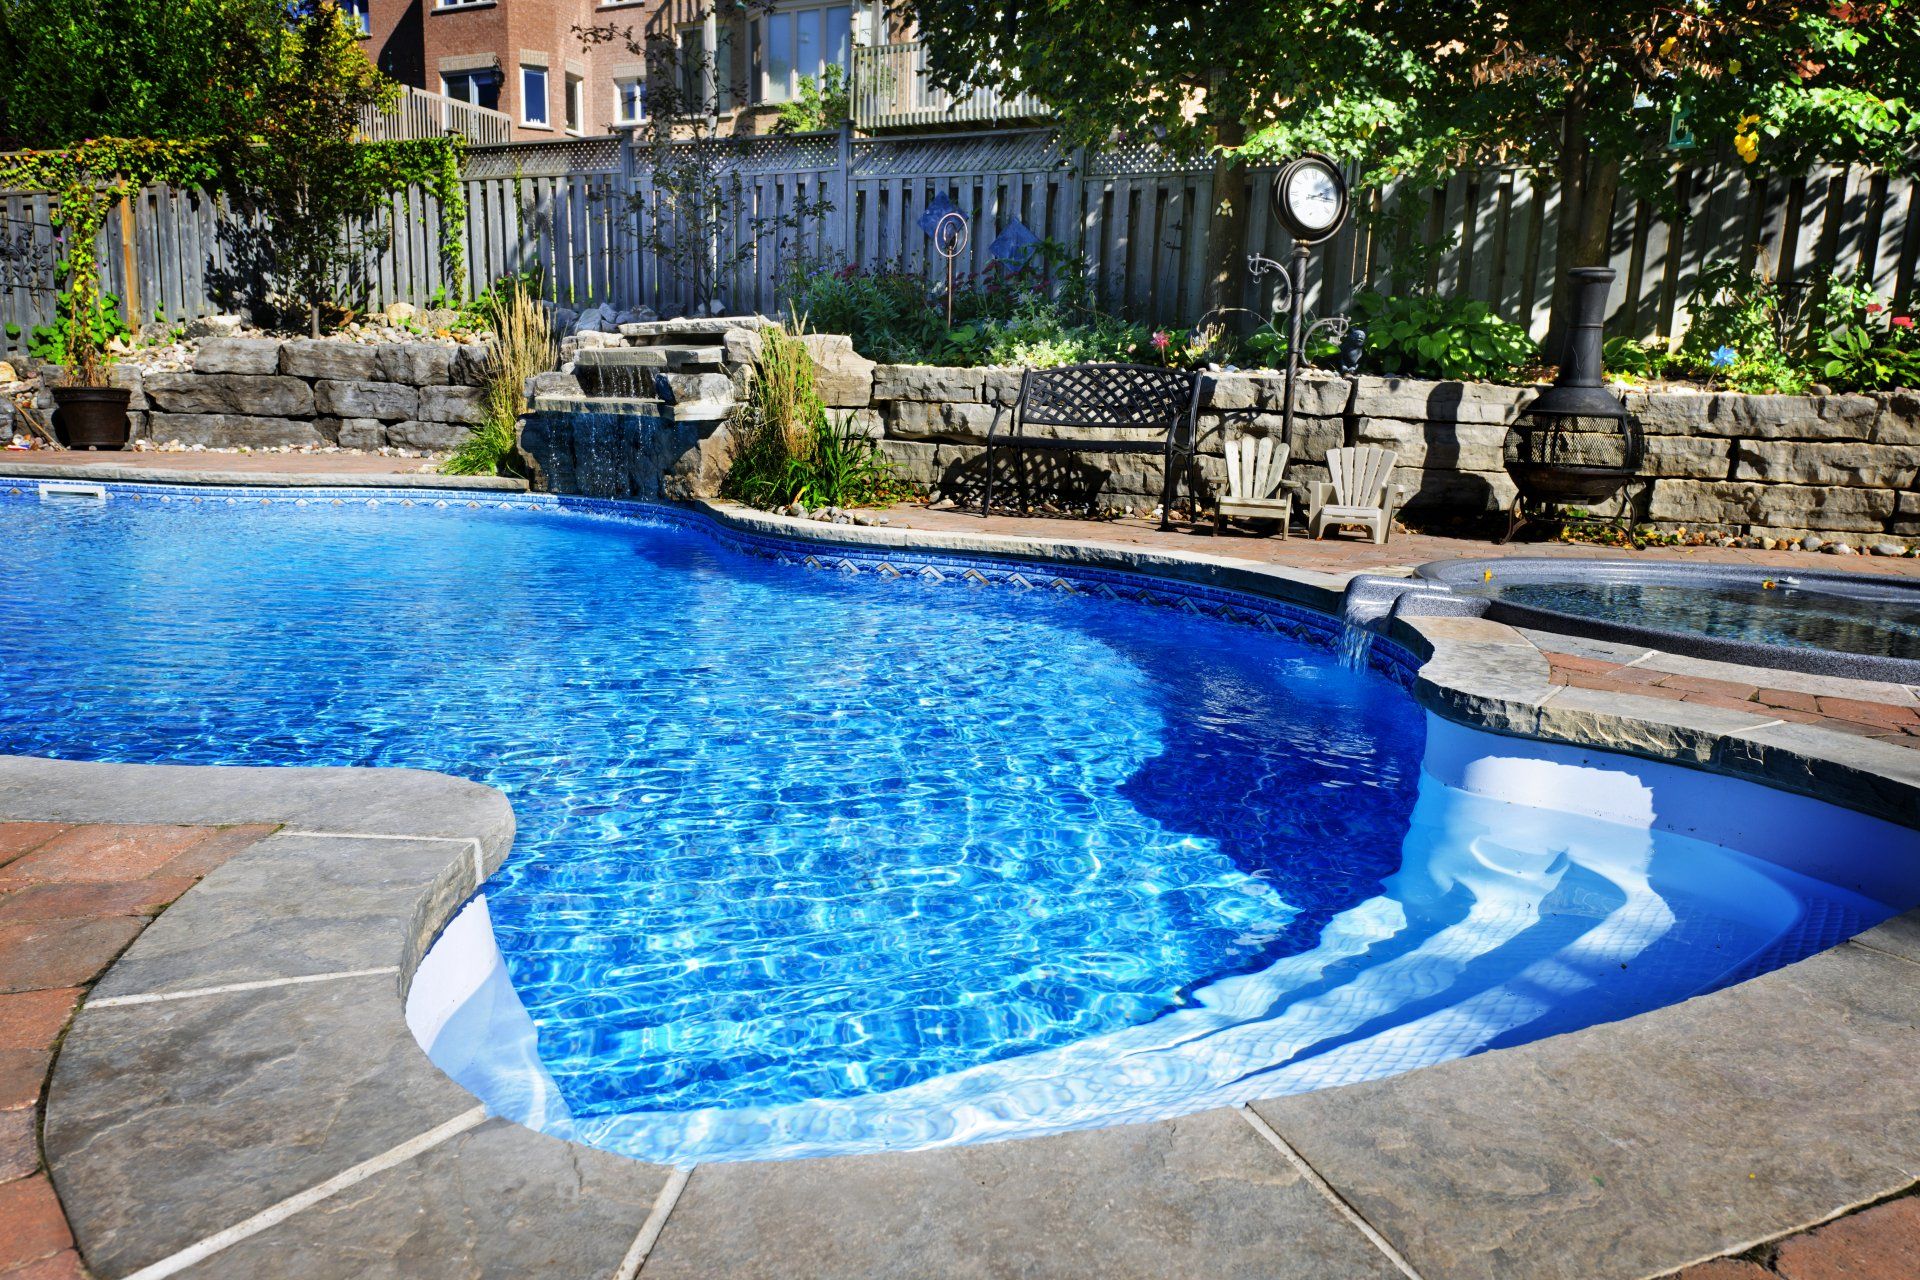 Pool patio renovated by all county pool service